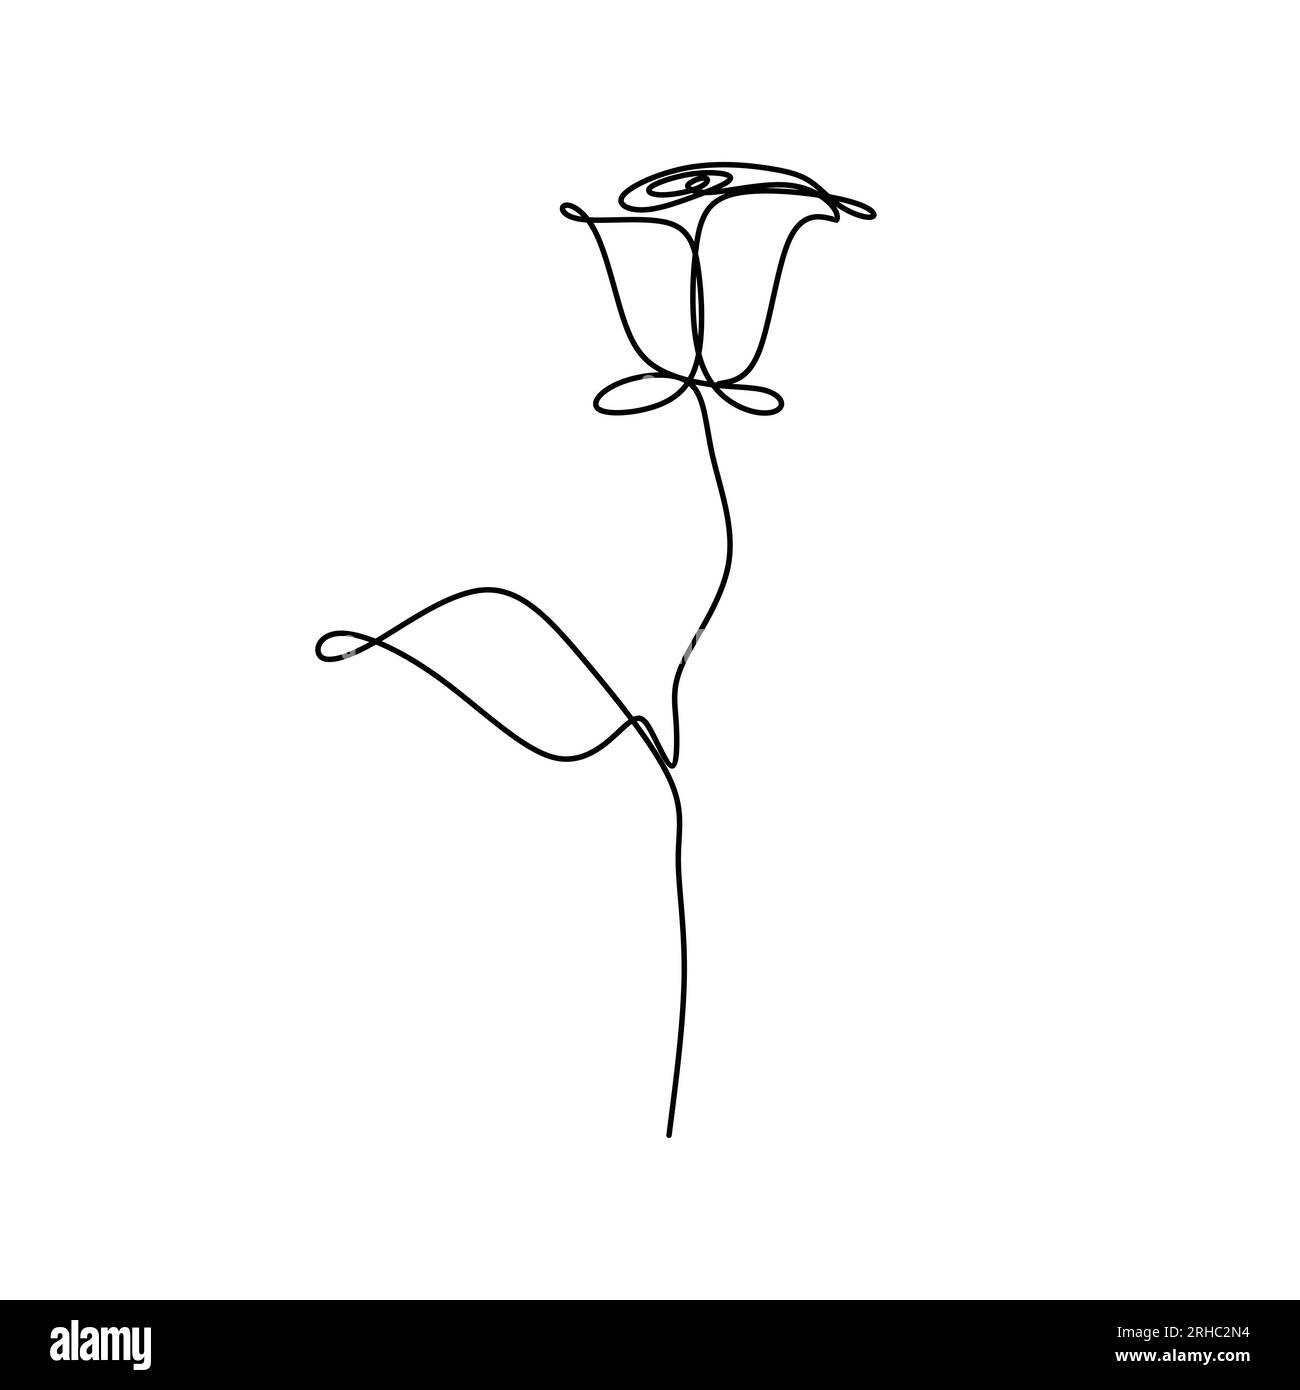 Continuous line drawing of rose petal vector illustration minimalist ...